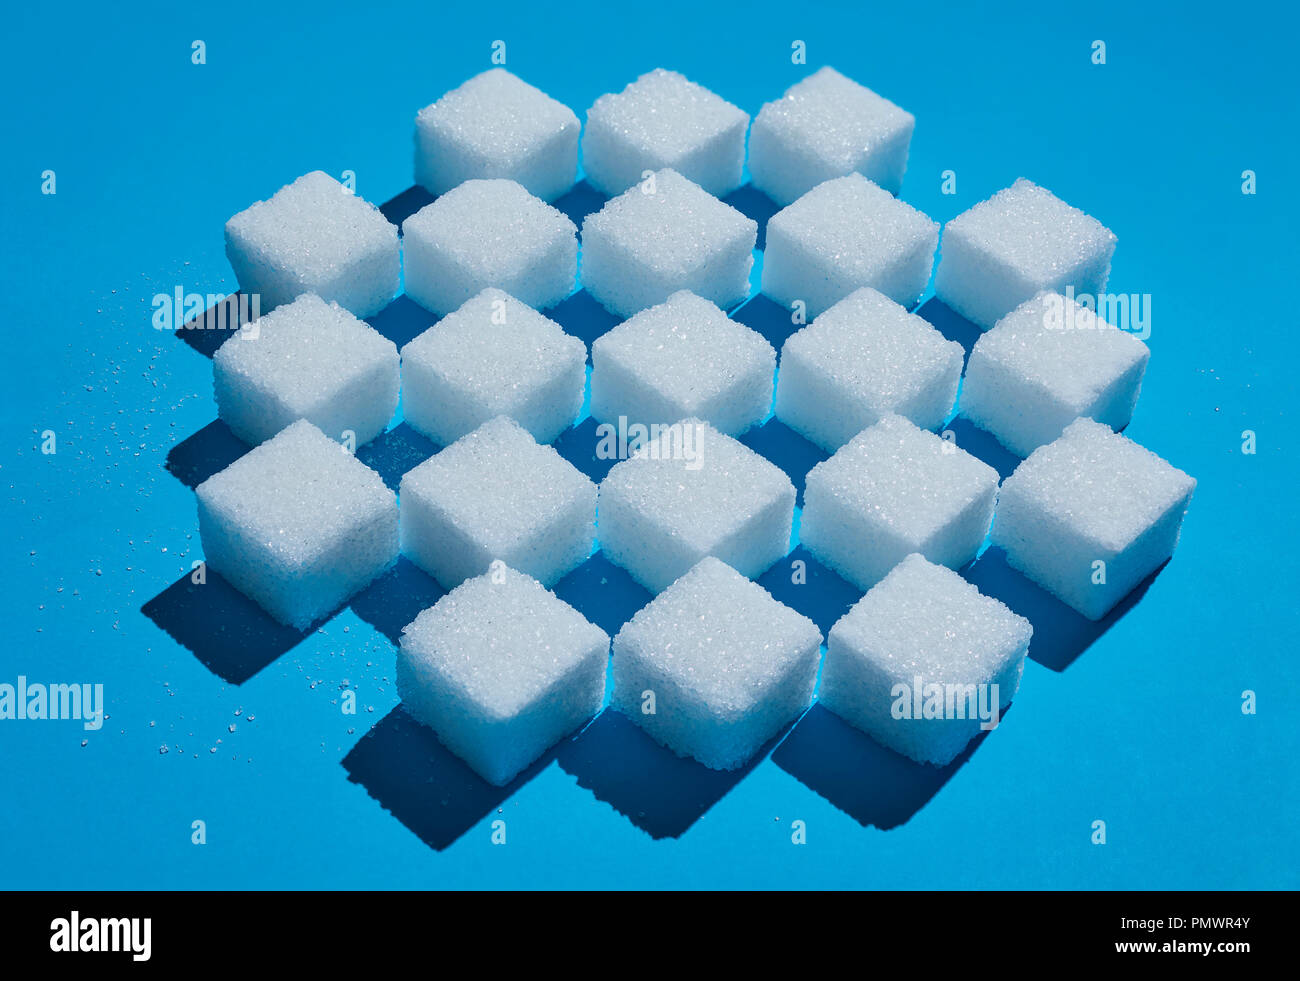 Sugar cubes forming checkered pattern on blue background Stock Photo